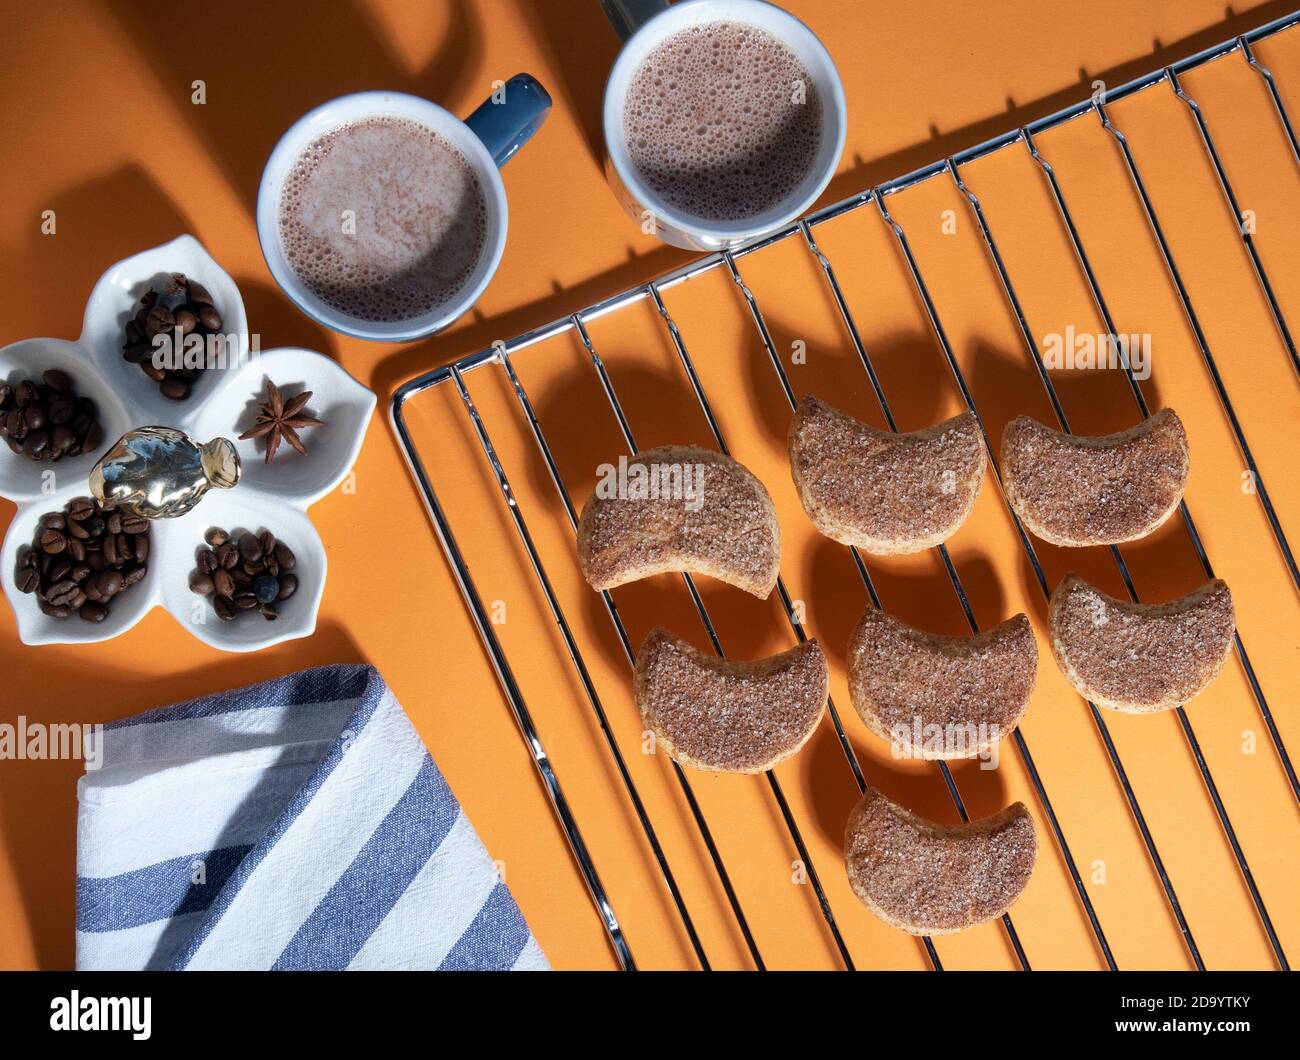 Two mugs of cacao, semilunar candied cookies on a metal grate, striped towel and spices. Top view with hard shadows Stock Photo